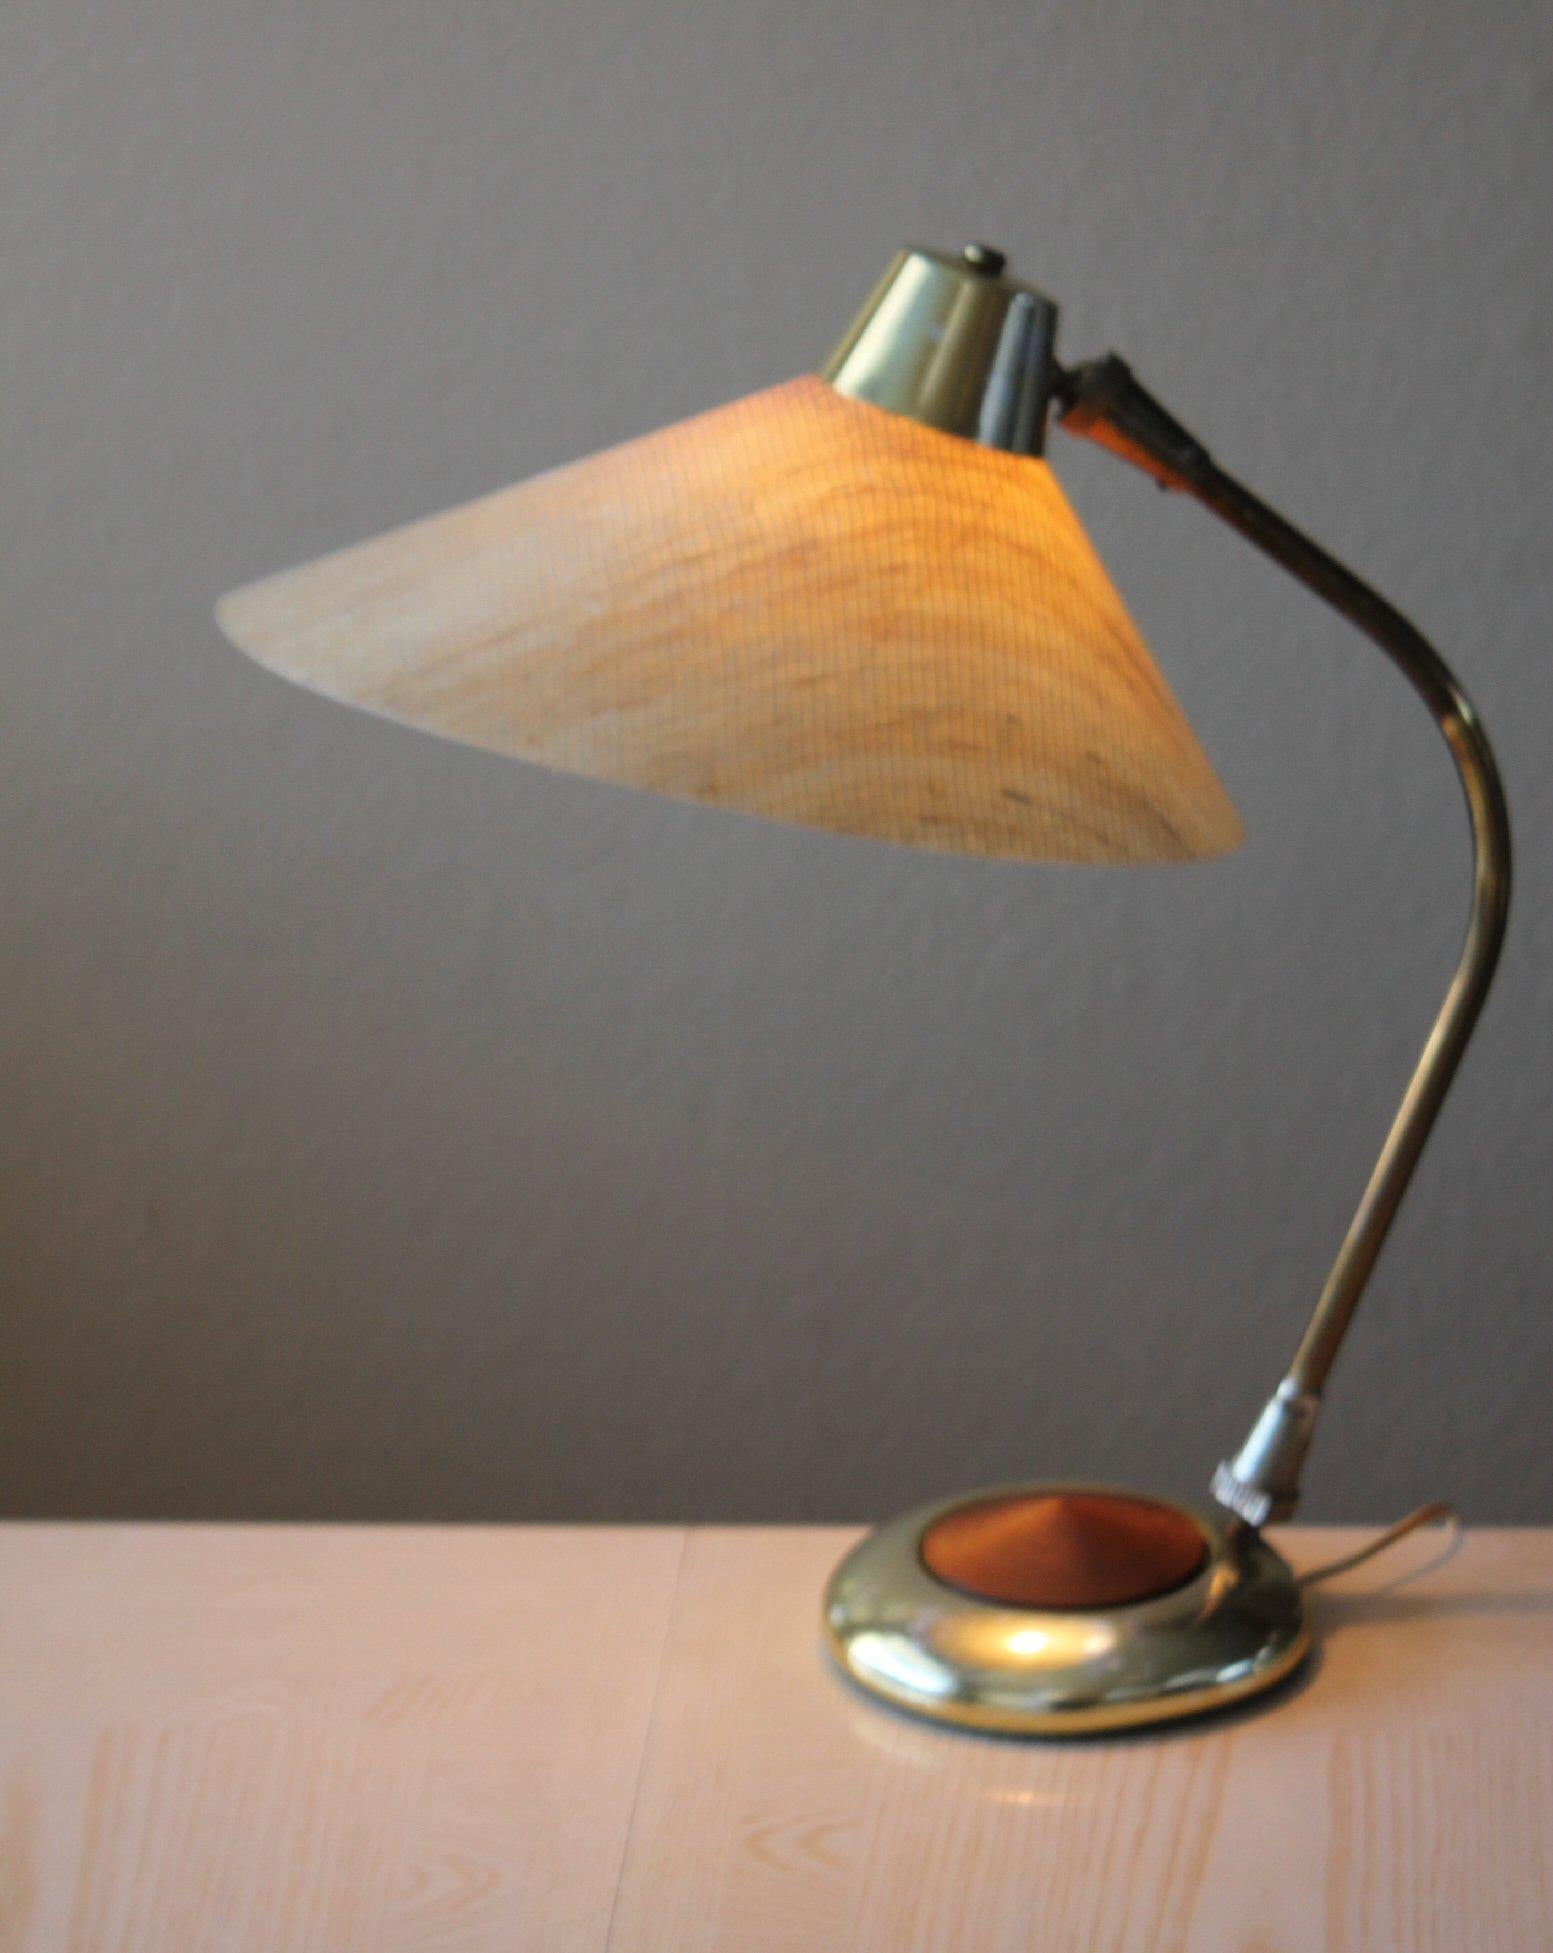 Hyper Rare!!

Mid Century Modern
Italian Designed 
Articulating Desk Lamp
Fiberglass Shade
Brushed Brass Finish

In the manner of Maurizio Tempestini

Here is a marvelous Italian designed desk lamp with an exquisite rotating teak turn switch!  We've